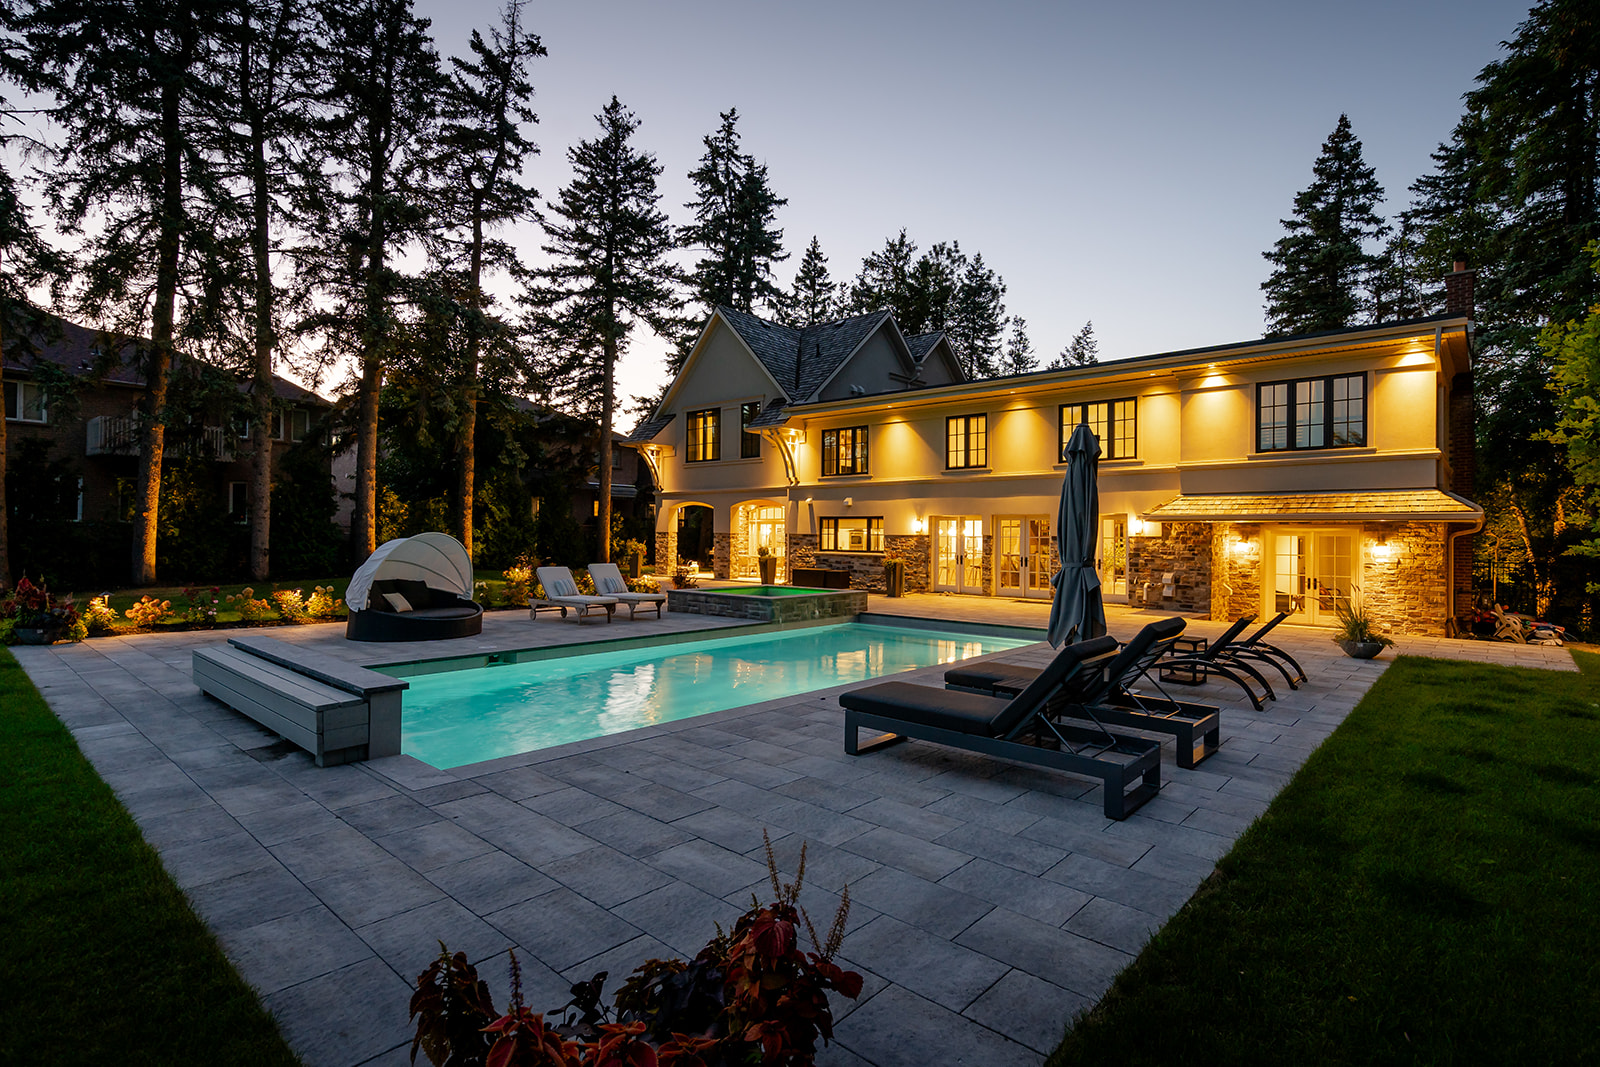 A backyard with an inground pool with furniture on either side and the house with lights on in the background.